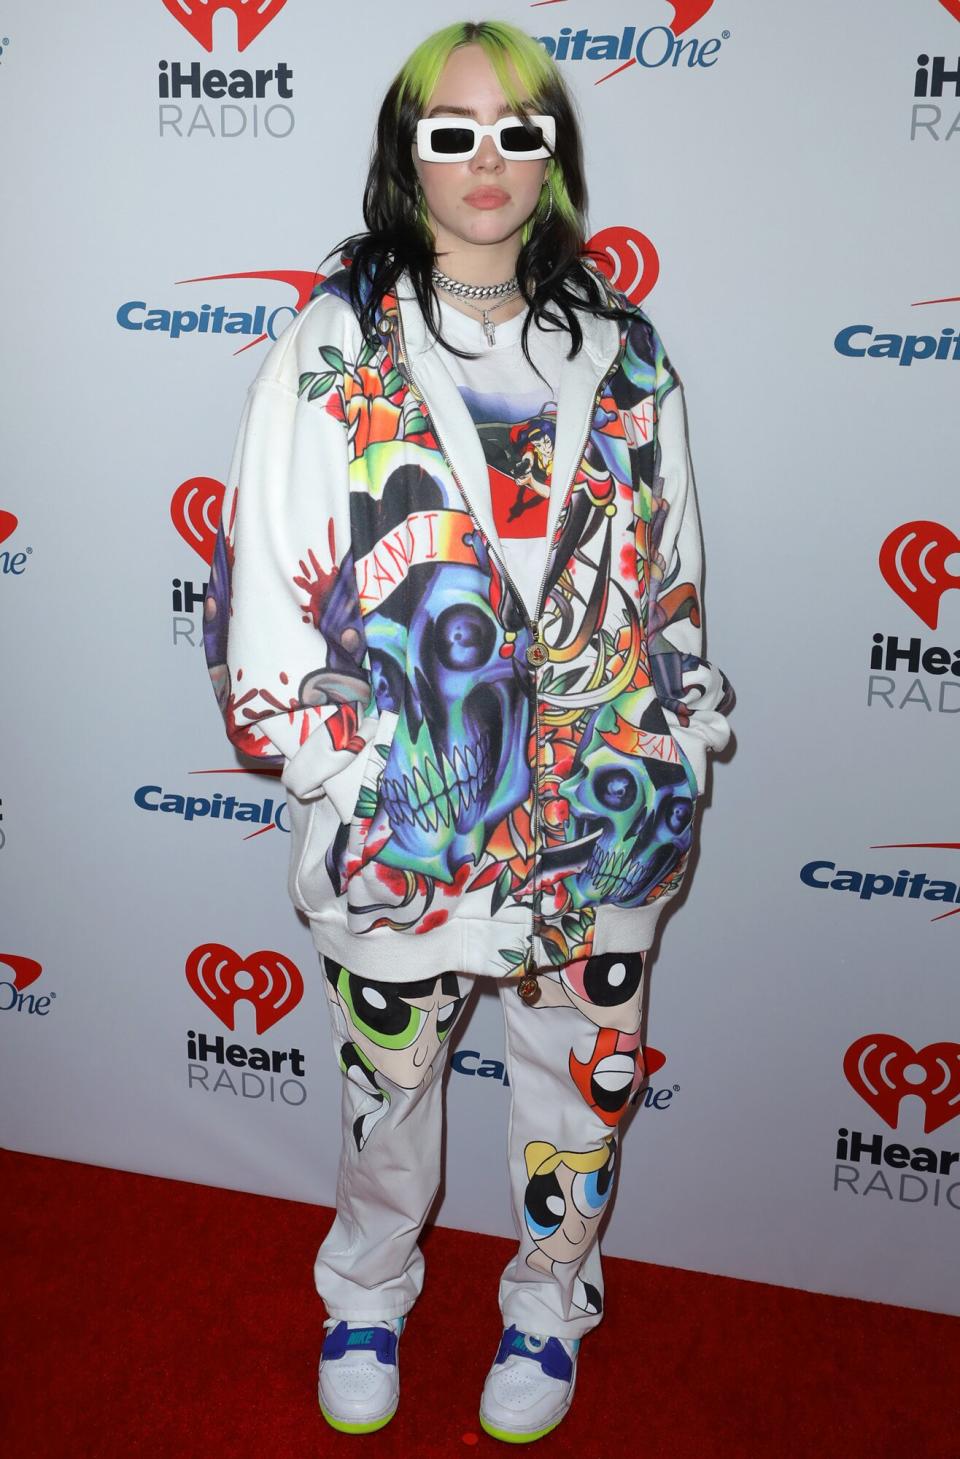 Billie Eilish attends iHeartRadio ALTer EGO presented by Capital One at The Forum on January 18, 2020 in Inglewood, California